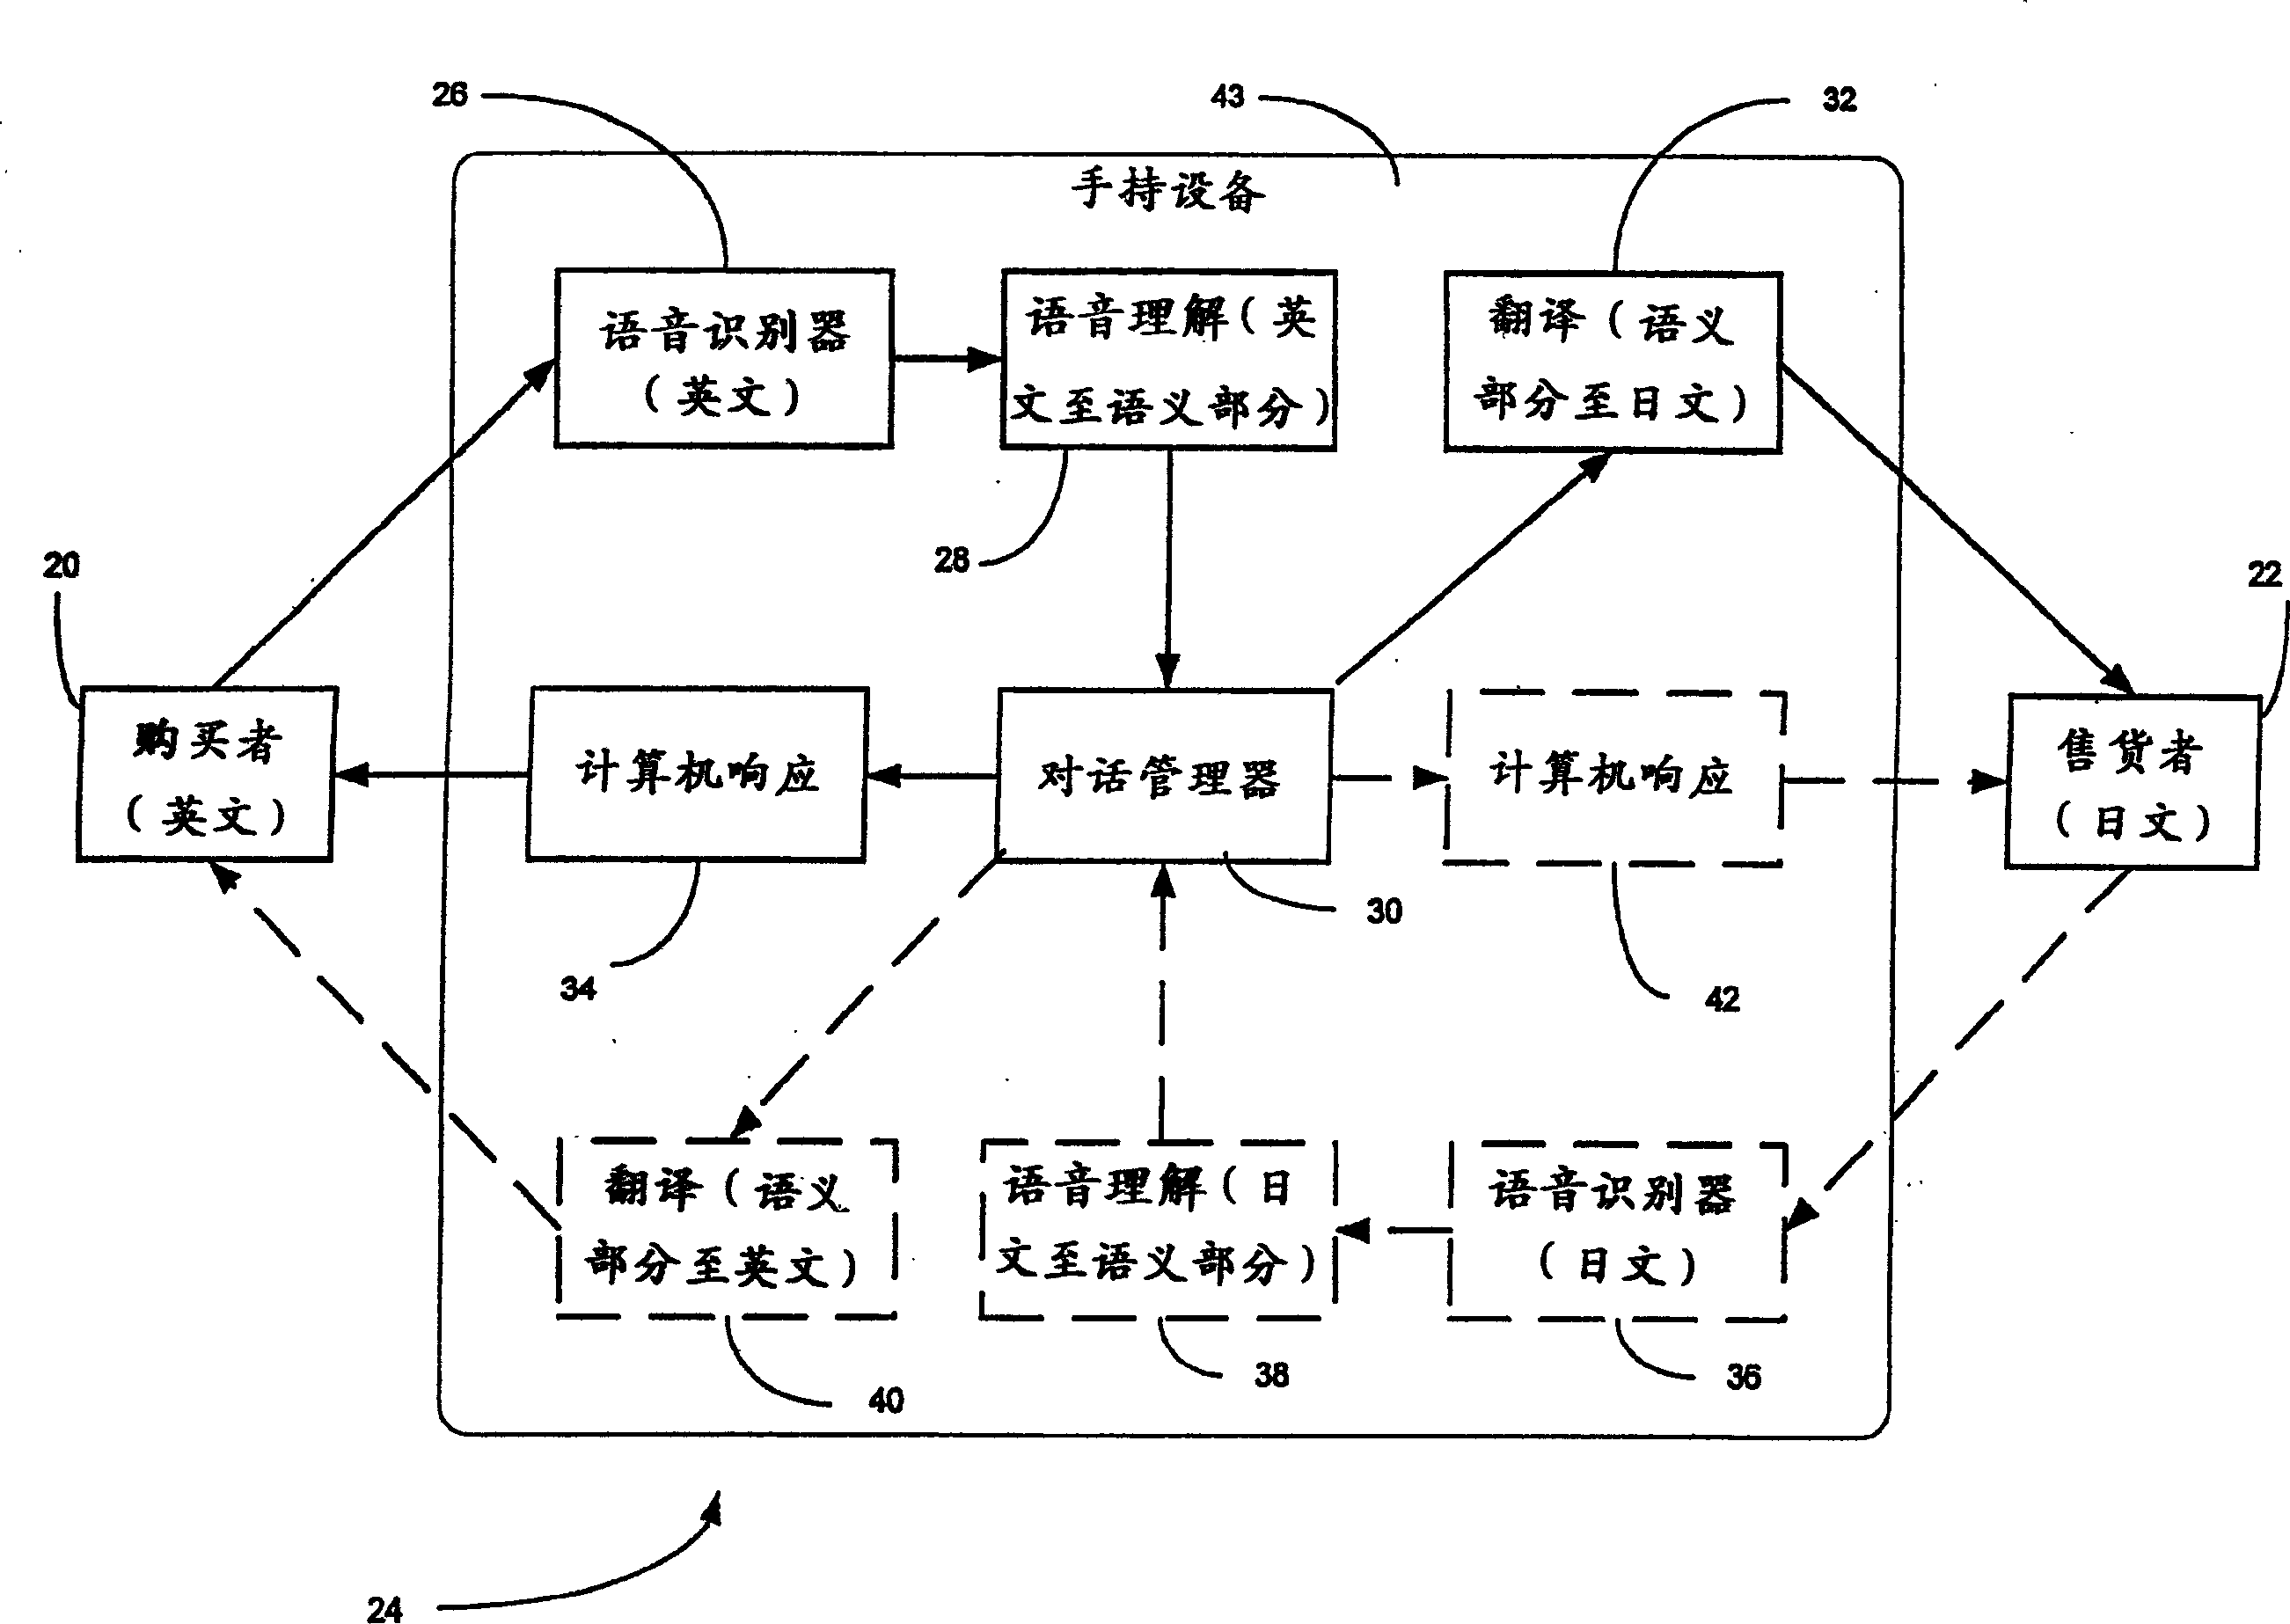 Apparatus and method for implementing language translation between speakers of different languages